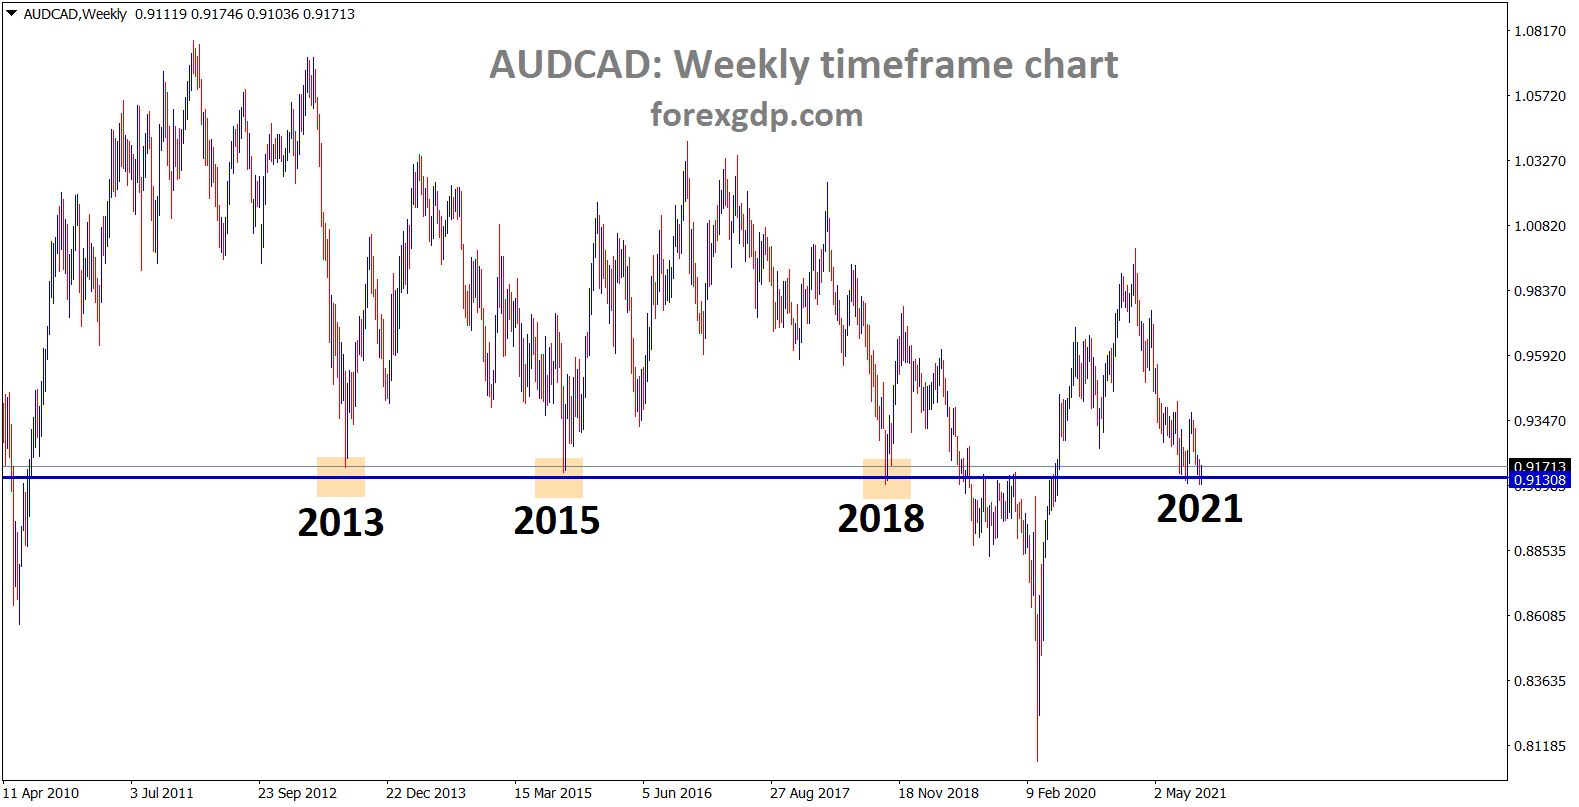 AUDCAD hits the major support area again after 3 years